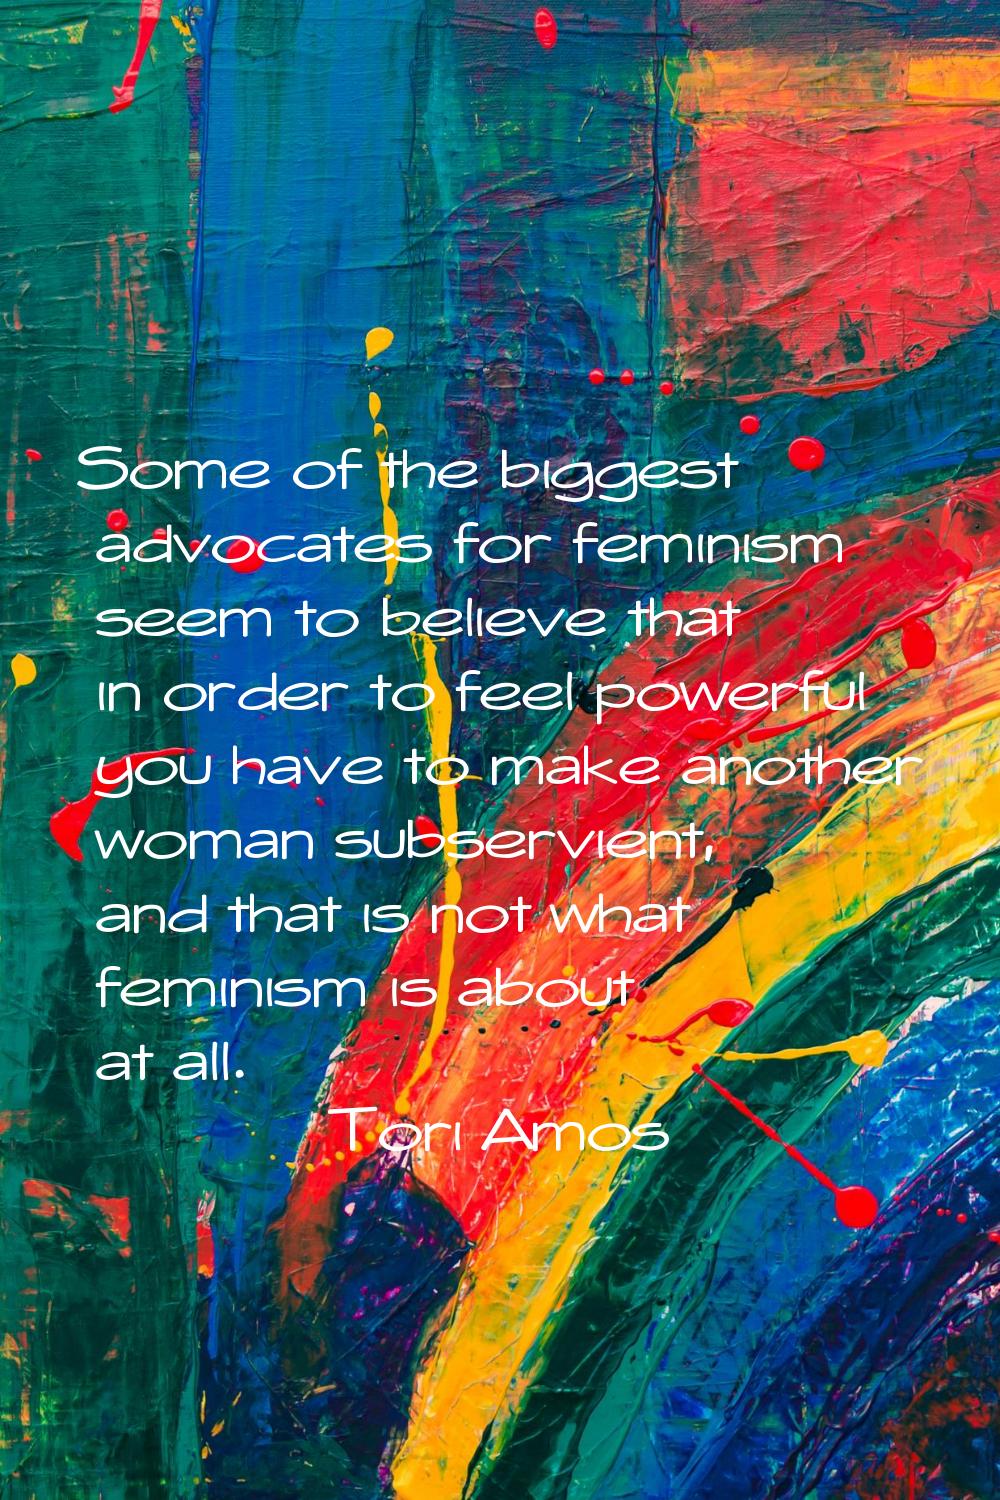 Some of the biggest advocates for feminism seem to believe that in order to feel powerful you have 